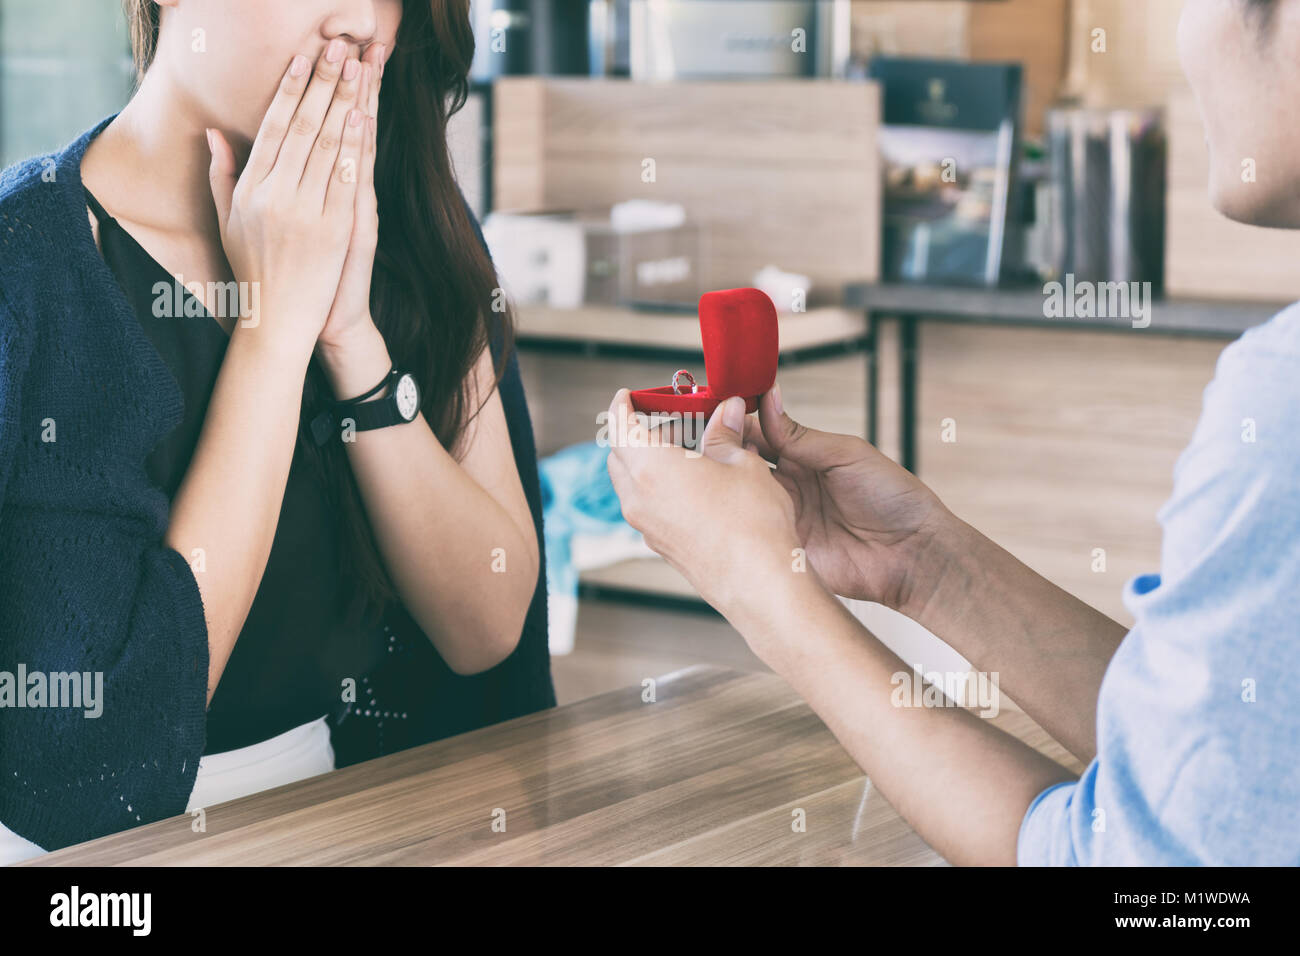 Asian man showing an engagement ring diamond to his amazed girlfriend in a restaurant with a warmth sunset outdoor in the background. Proposal concept Stock Photo